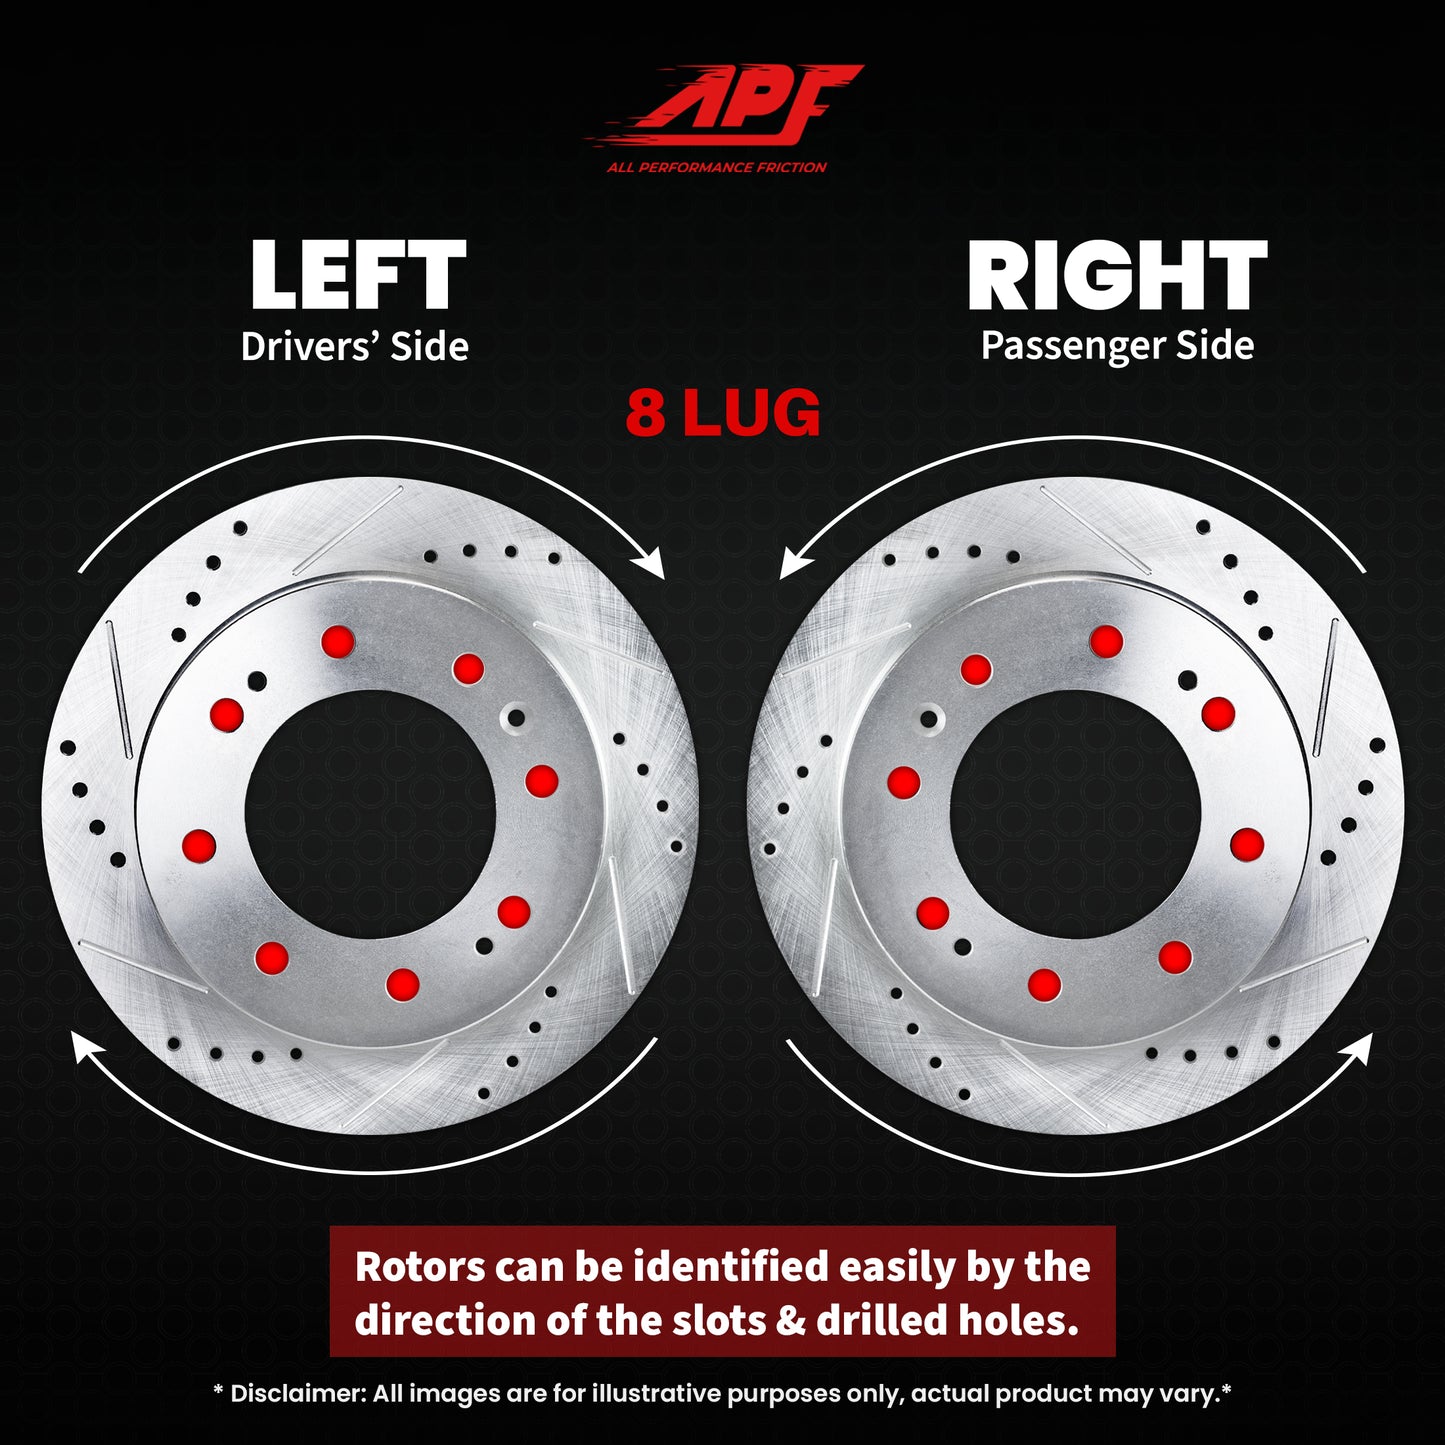 APF All Performance Friction Rear Rotors and Pads Half Kit compatible with GMC Savana 4500 2009-2019 Zinc Drilled Slotted Rotors with Ceramic Carbon Fiber Brake Pads | $558.85